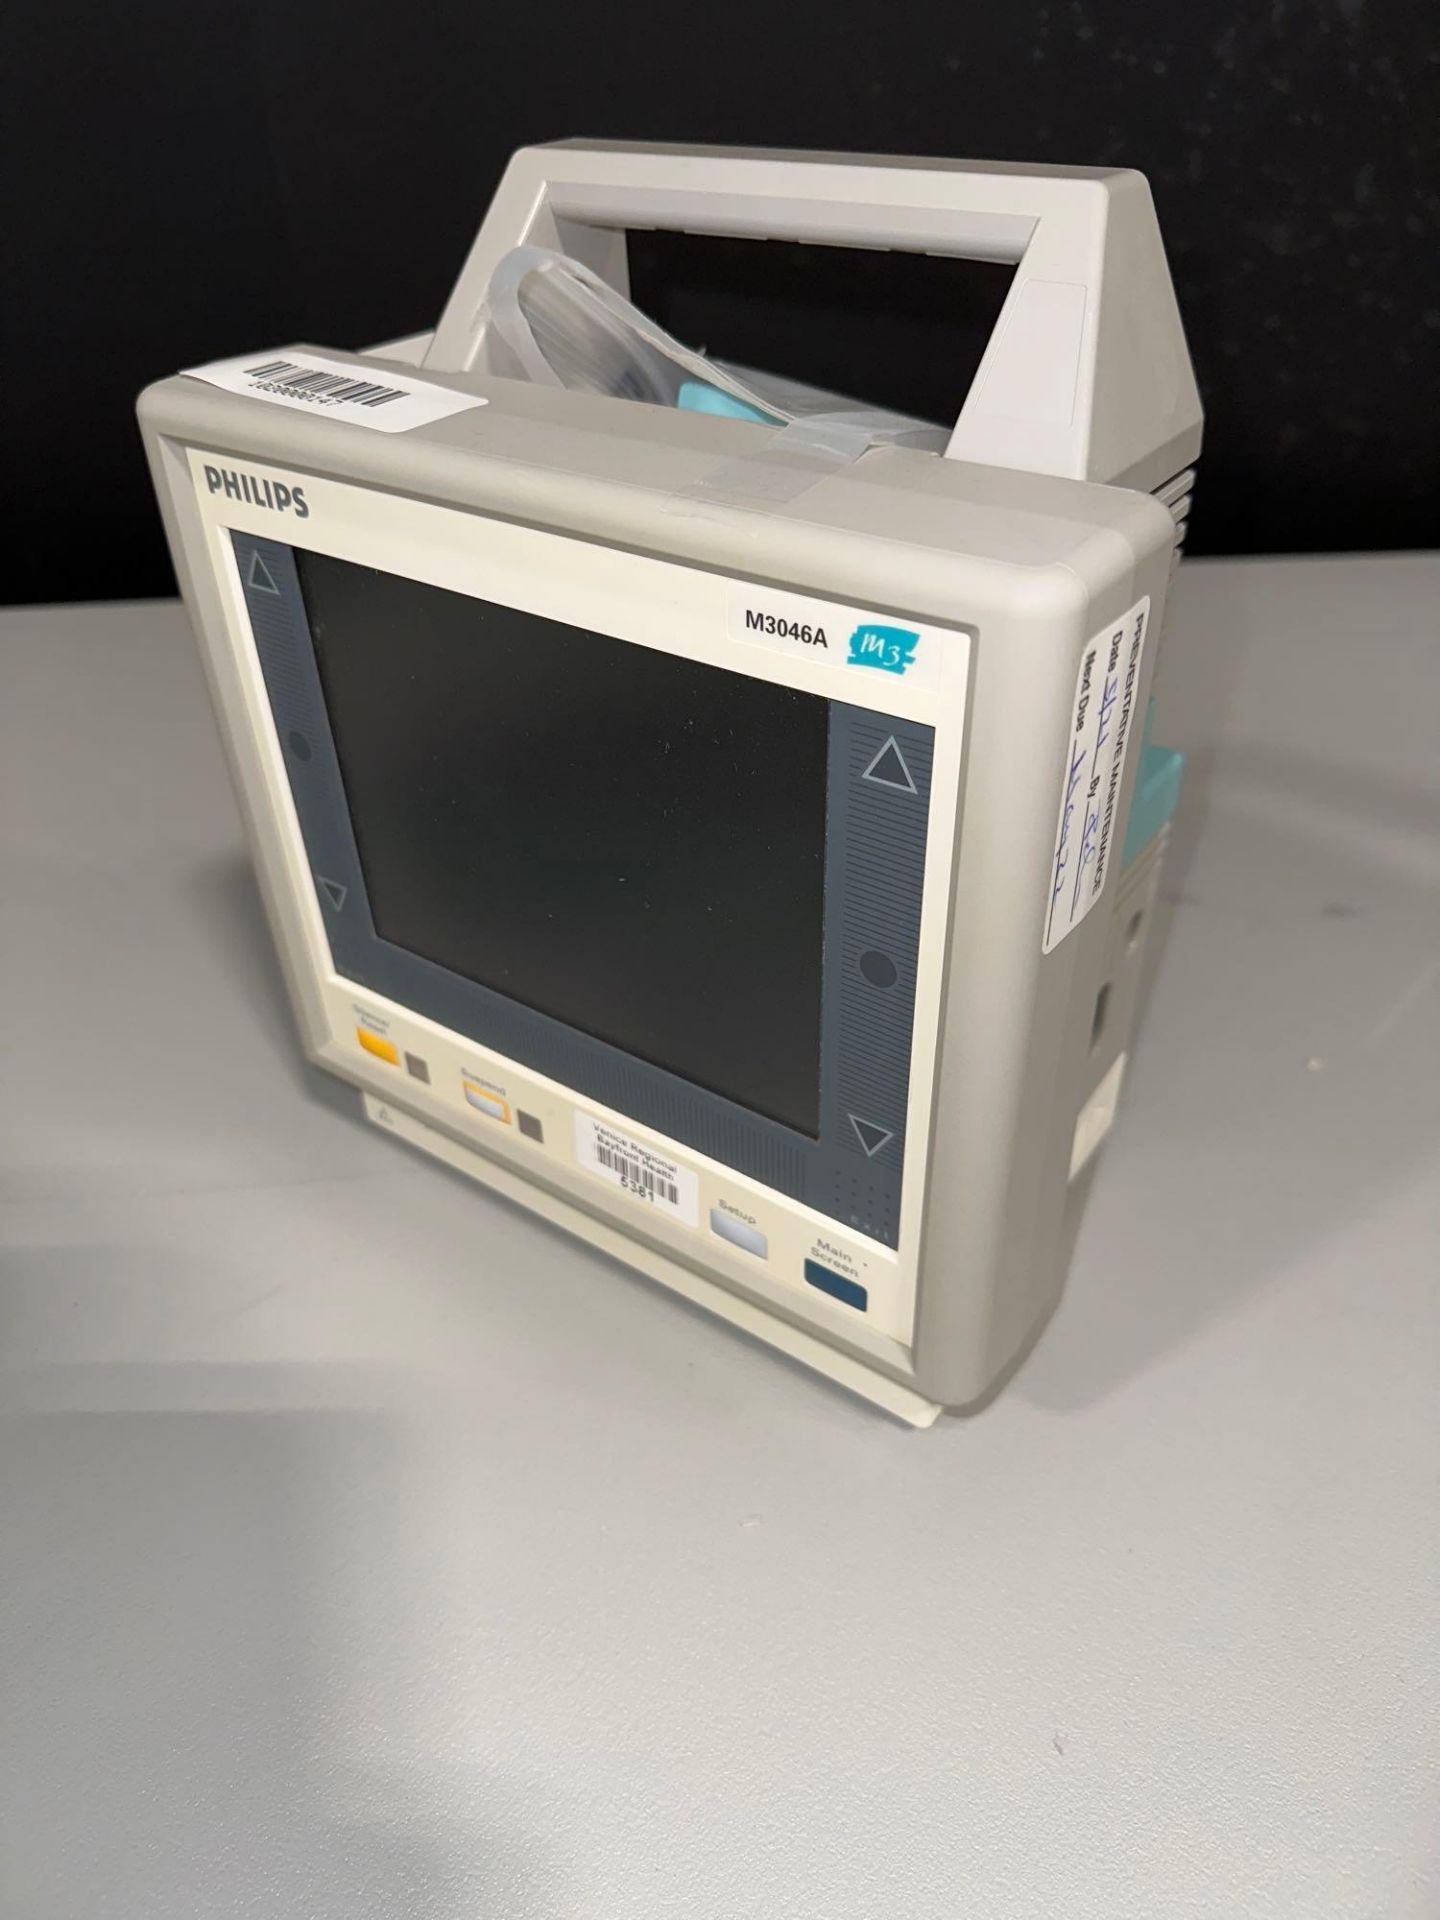 PHILIPS M3 PATIENT MONITOR - Image 2 of 2